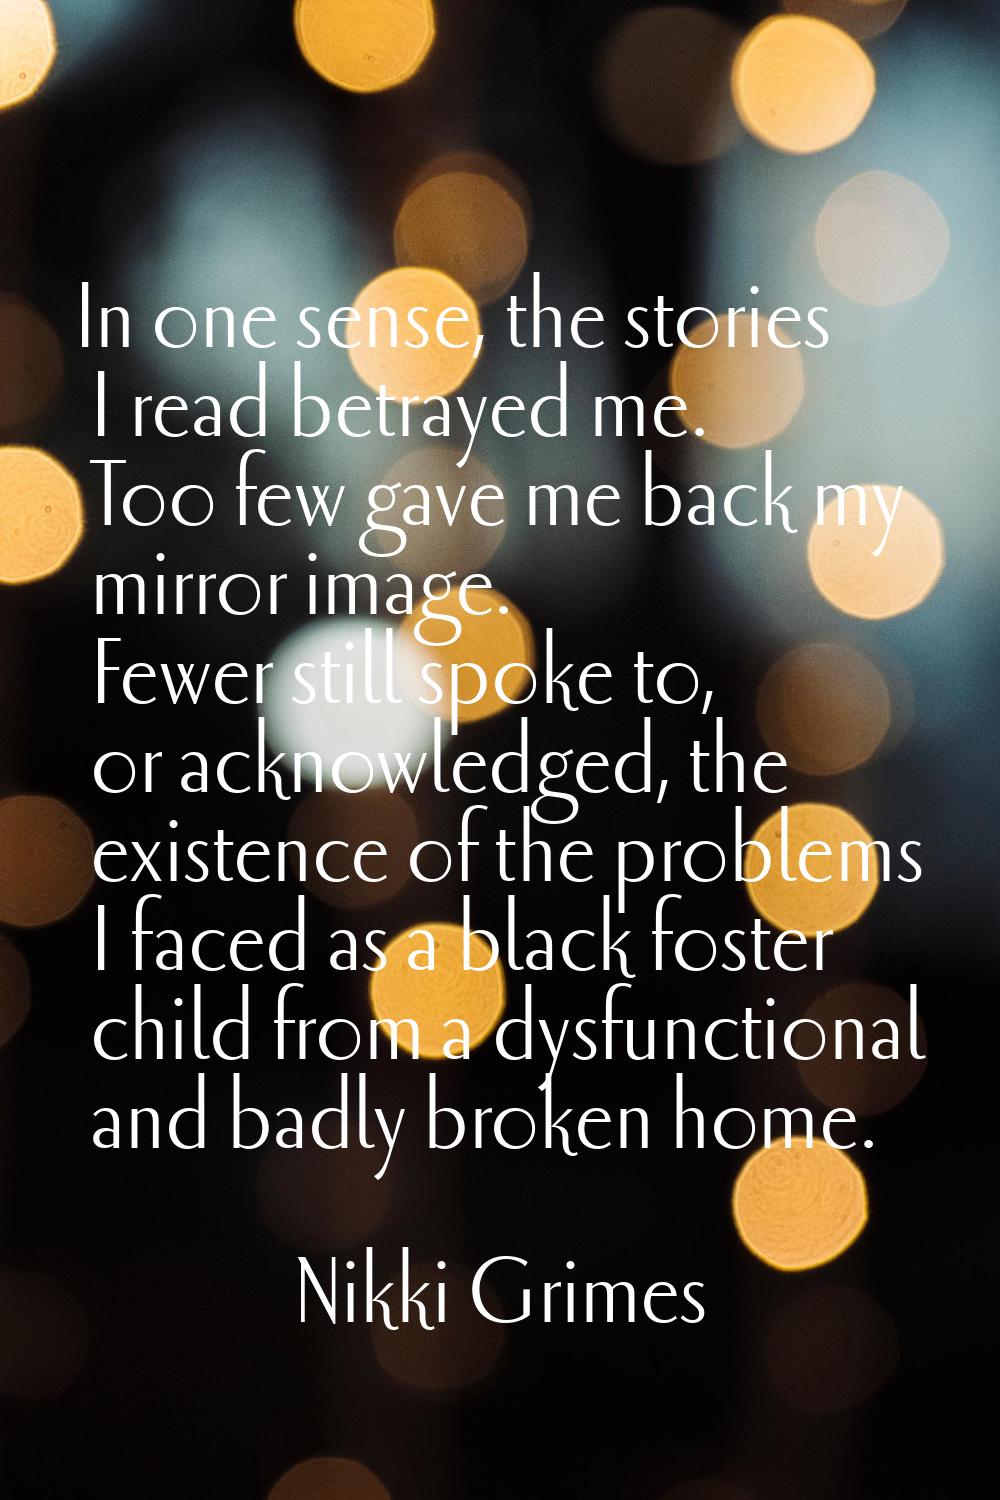 In one sense, the stories I read betrayed me. Too few gave me back my mirror image. Fewer still spo